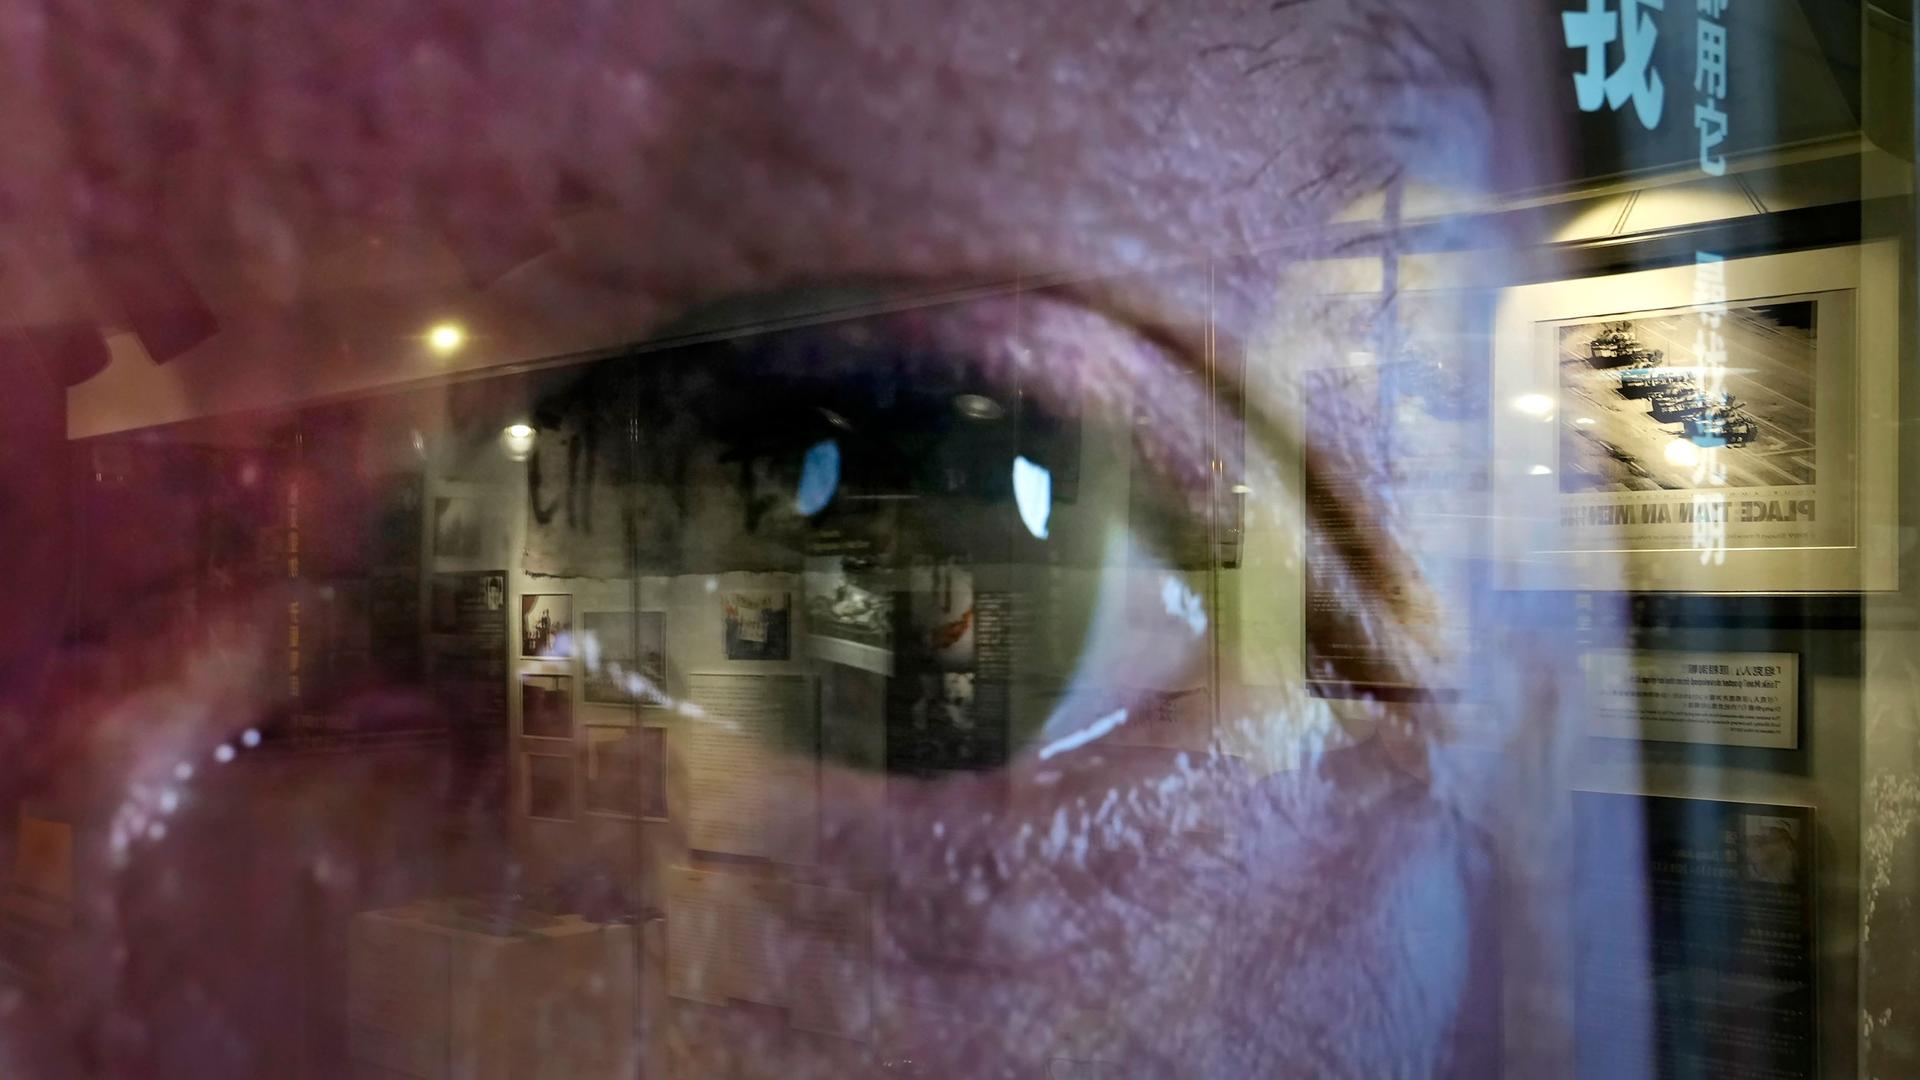 A close of photograph showing a person's eye and seen through clear glass reflecting the image of a gallery exhibit.